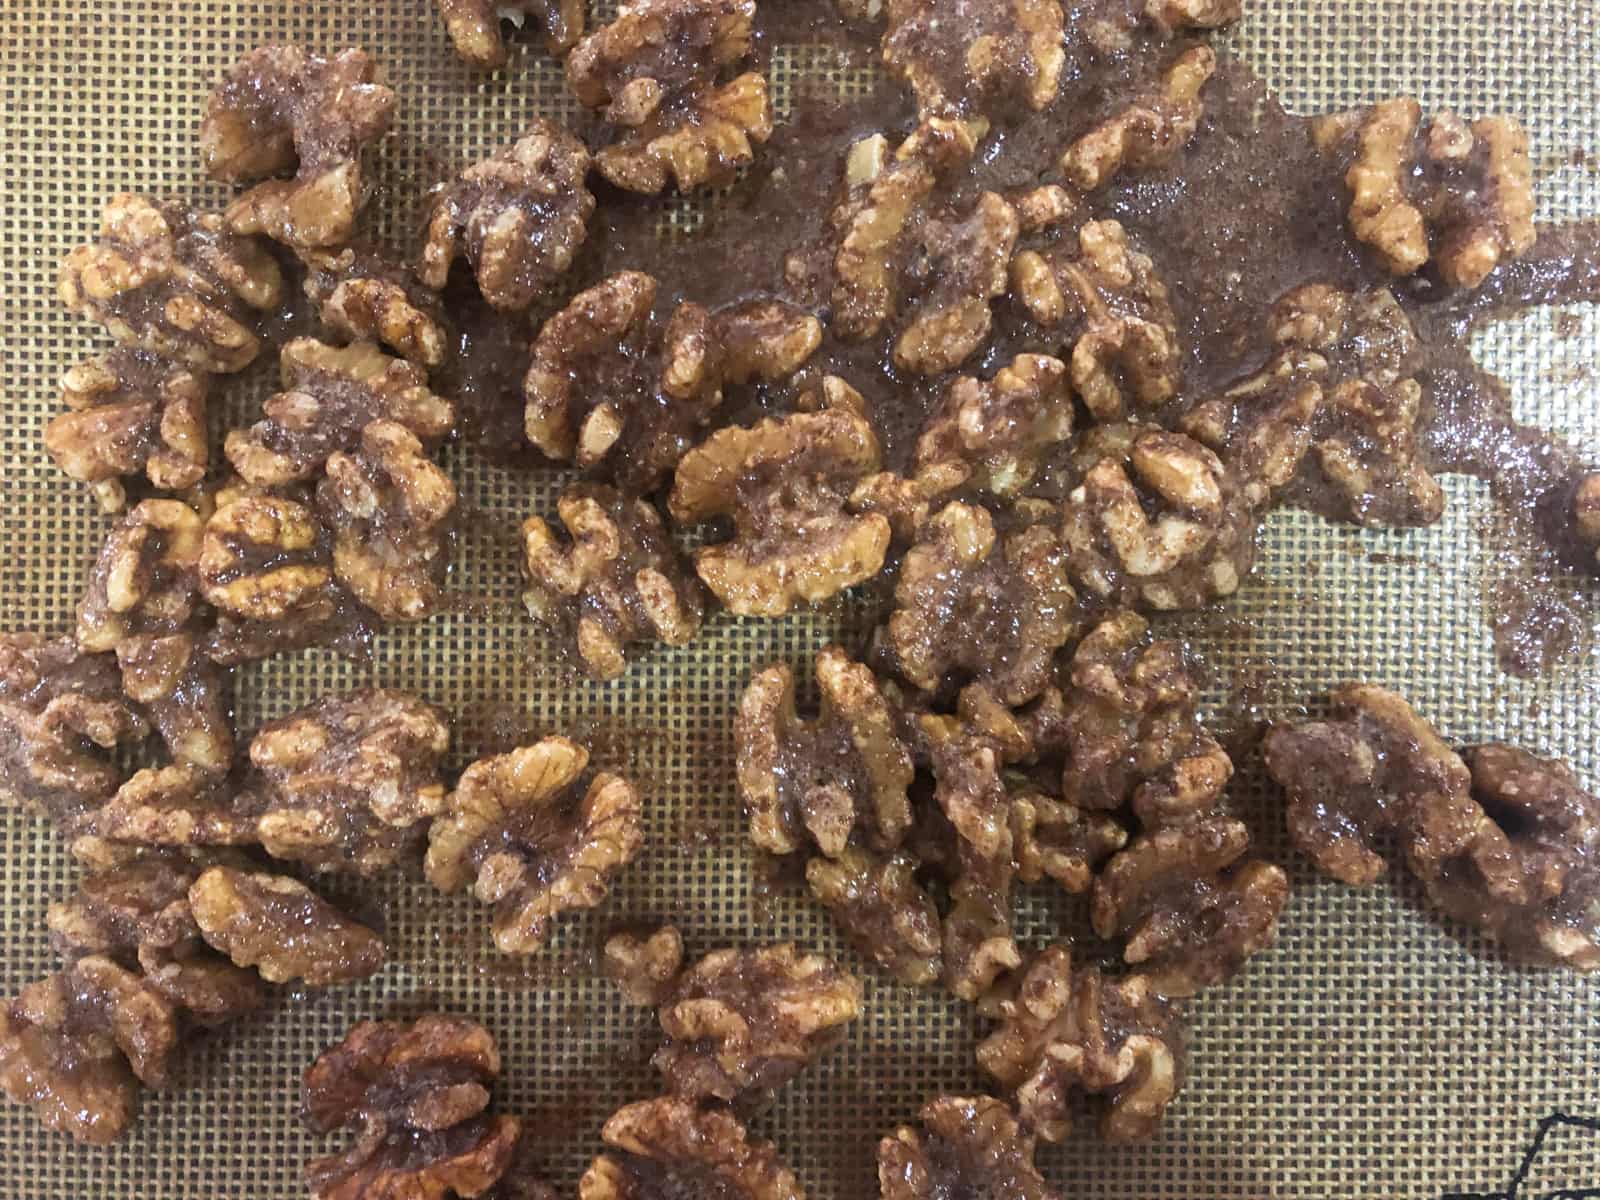 Spiced walnuts cooling on a silpat mat.